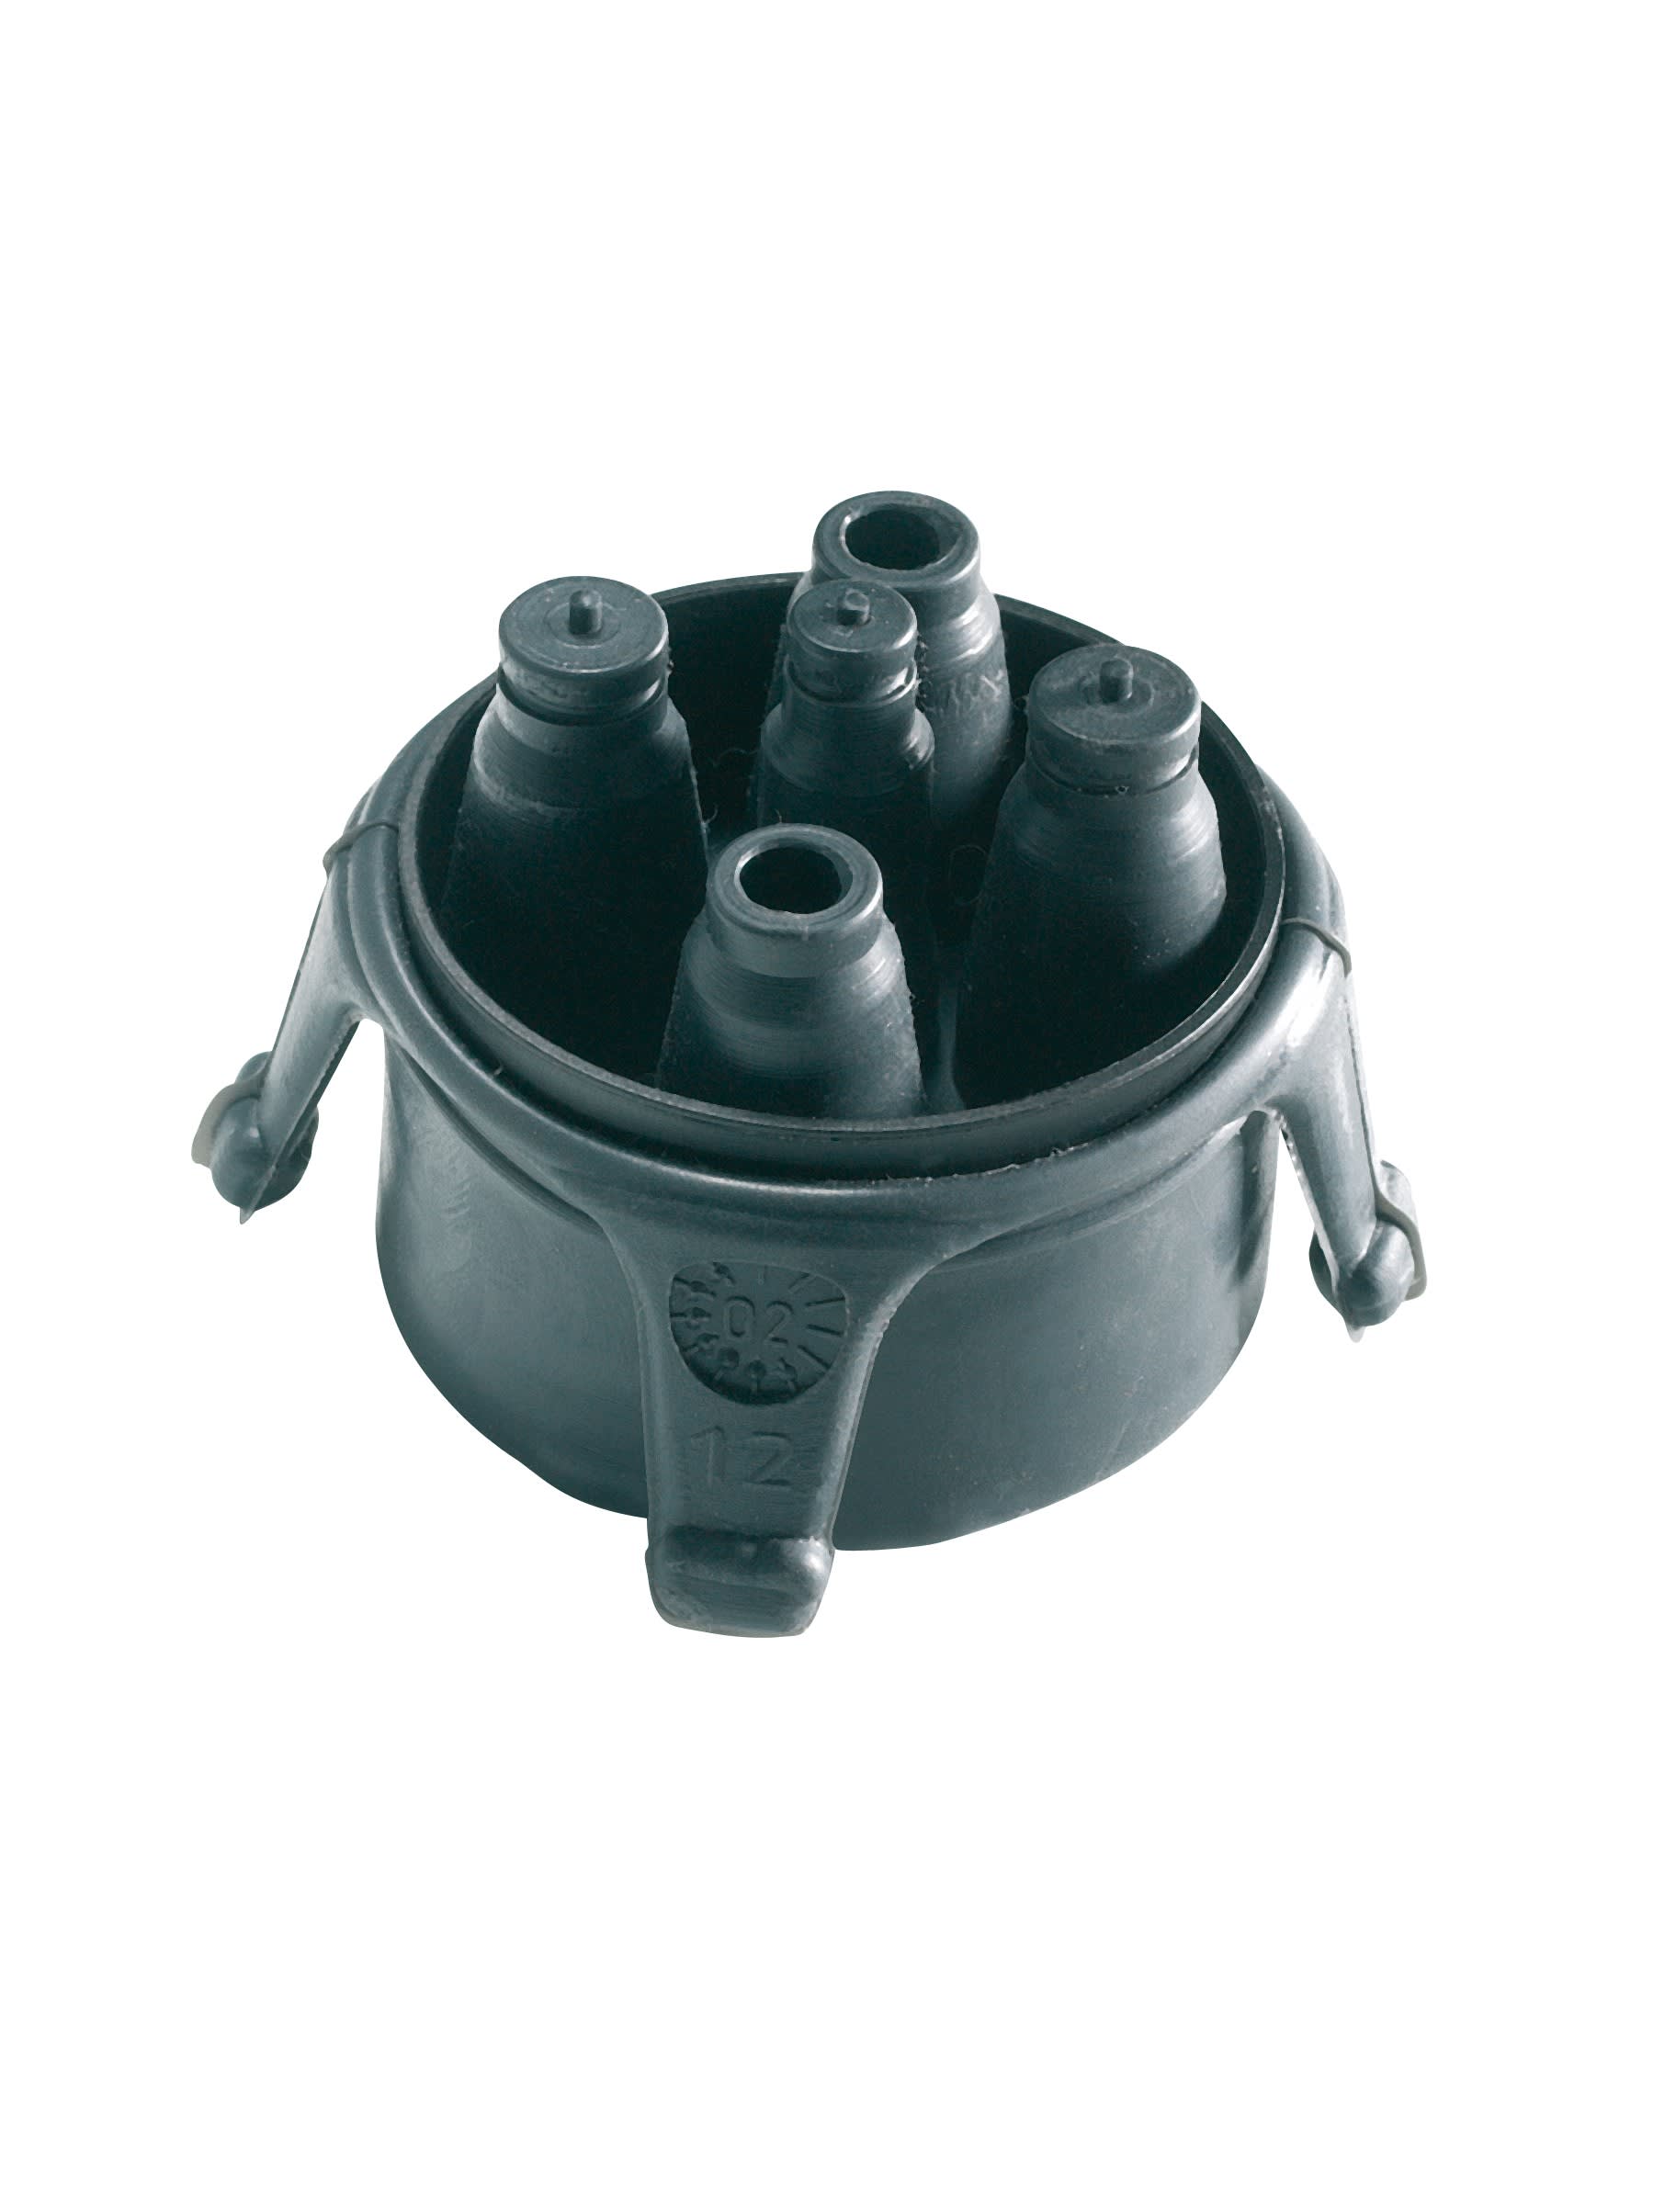 Cahors - Extremite retractable a froid (EI5-TF 25-35)